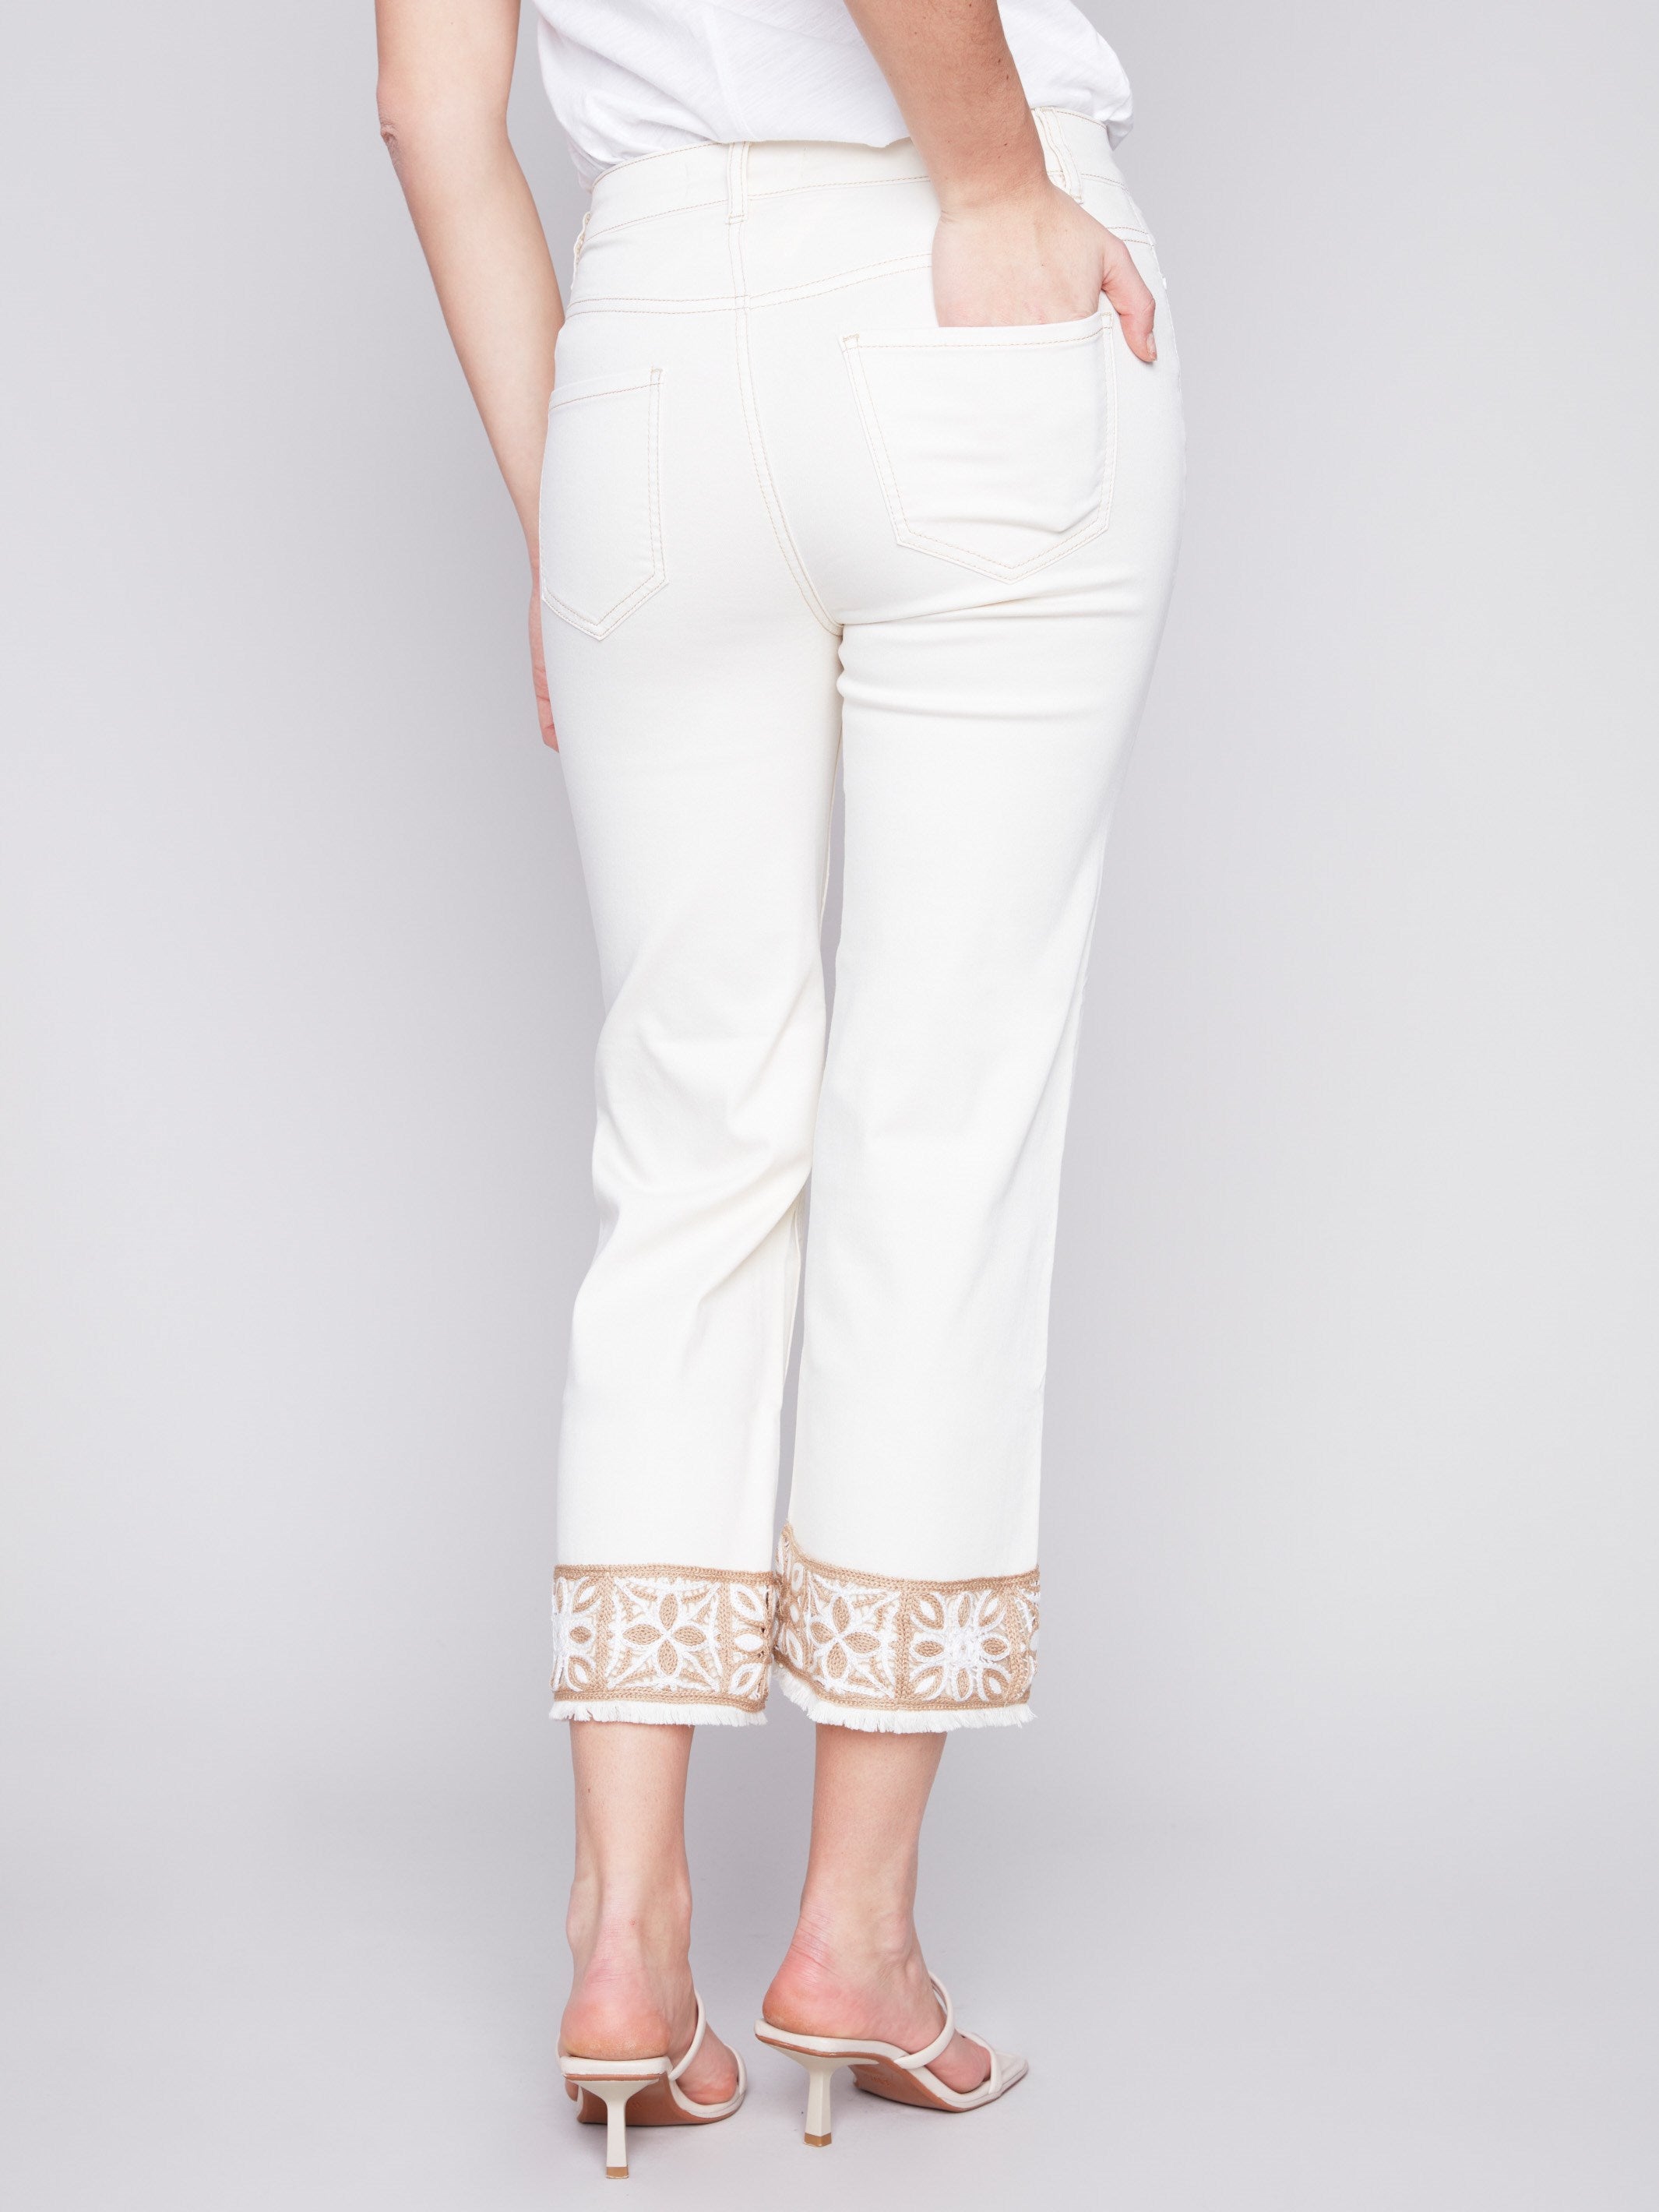 Charlie B Twill Pants with Crochet Cuff - Natural - Image 3